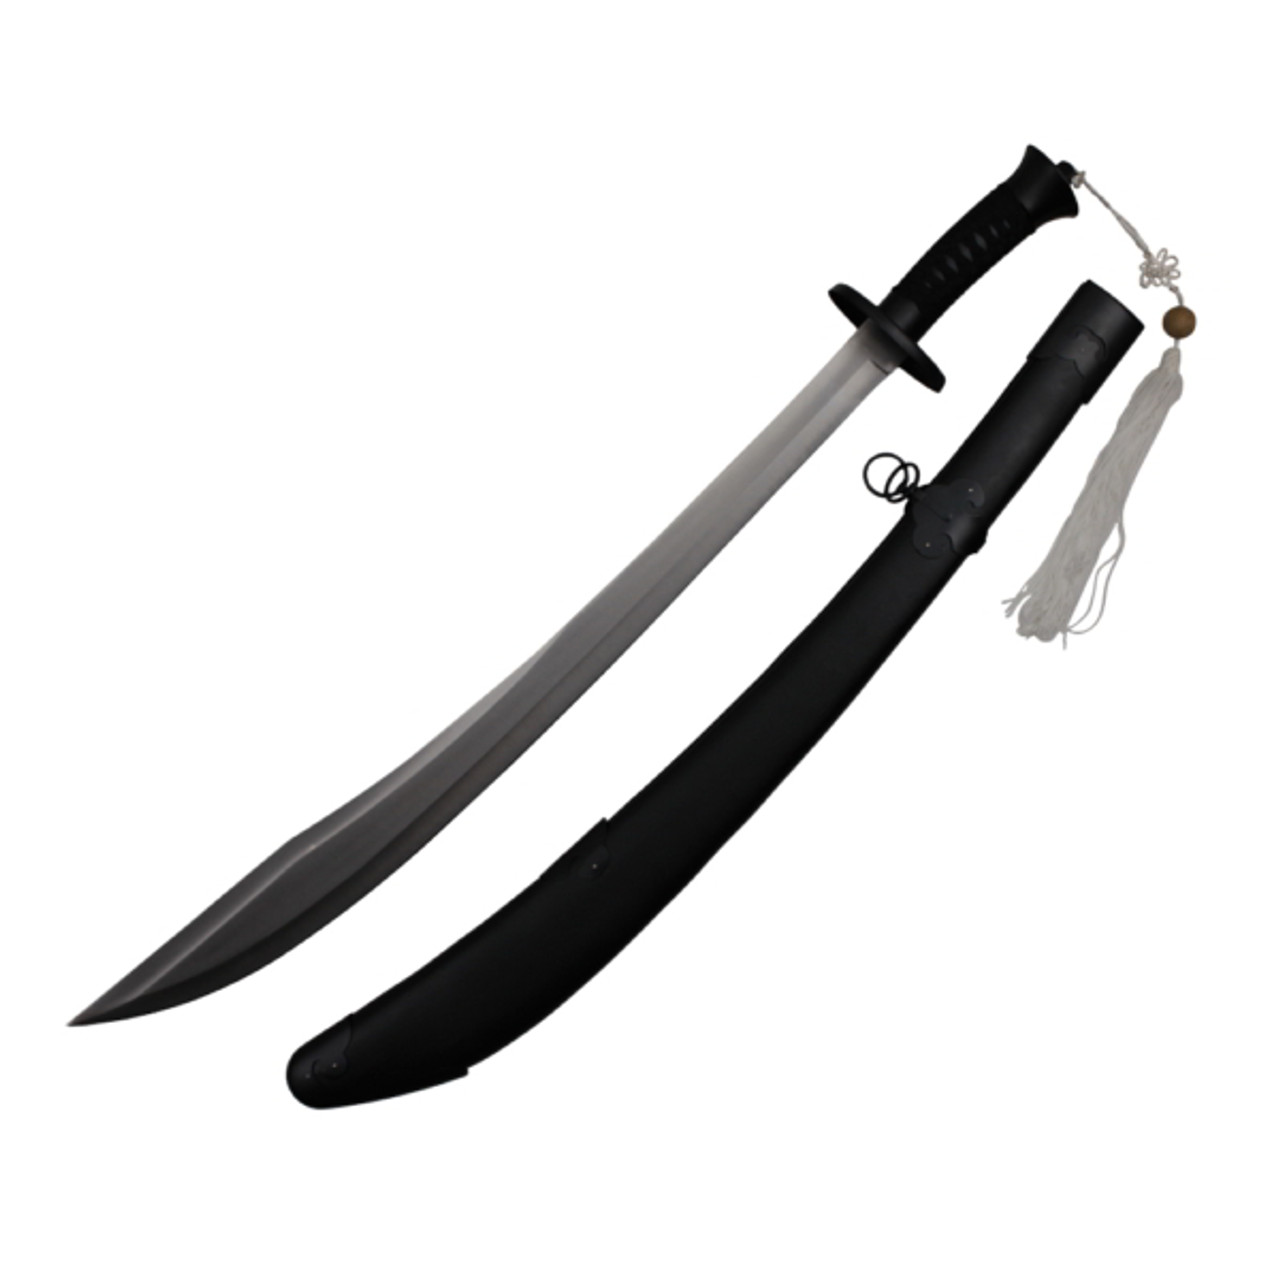 Chinese Broad Sword With Carbon Steel Blade and Tassels - Black